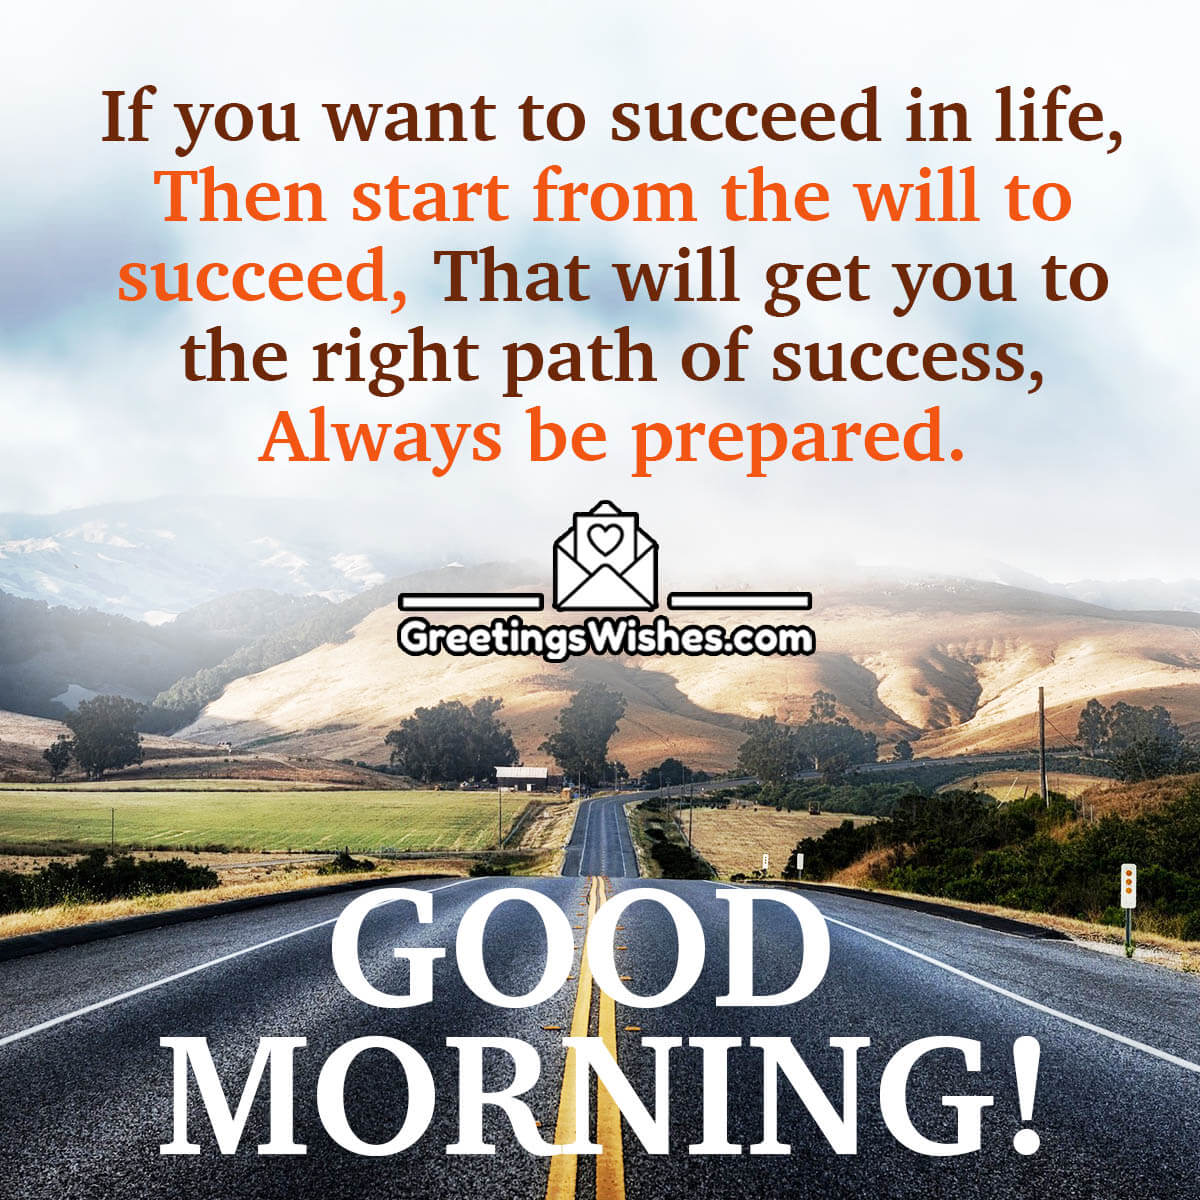 Inspirational Good Morning Wishes - Greetings Wishes